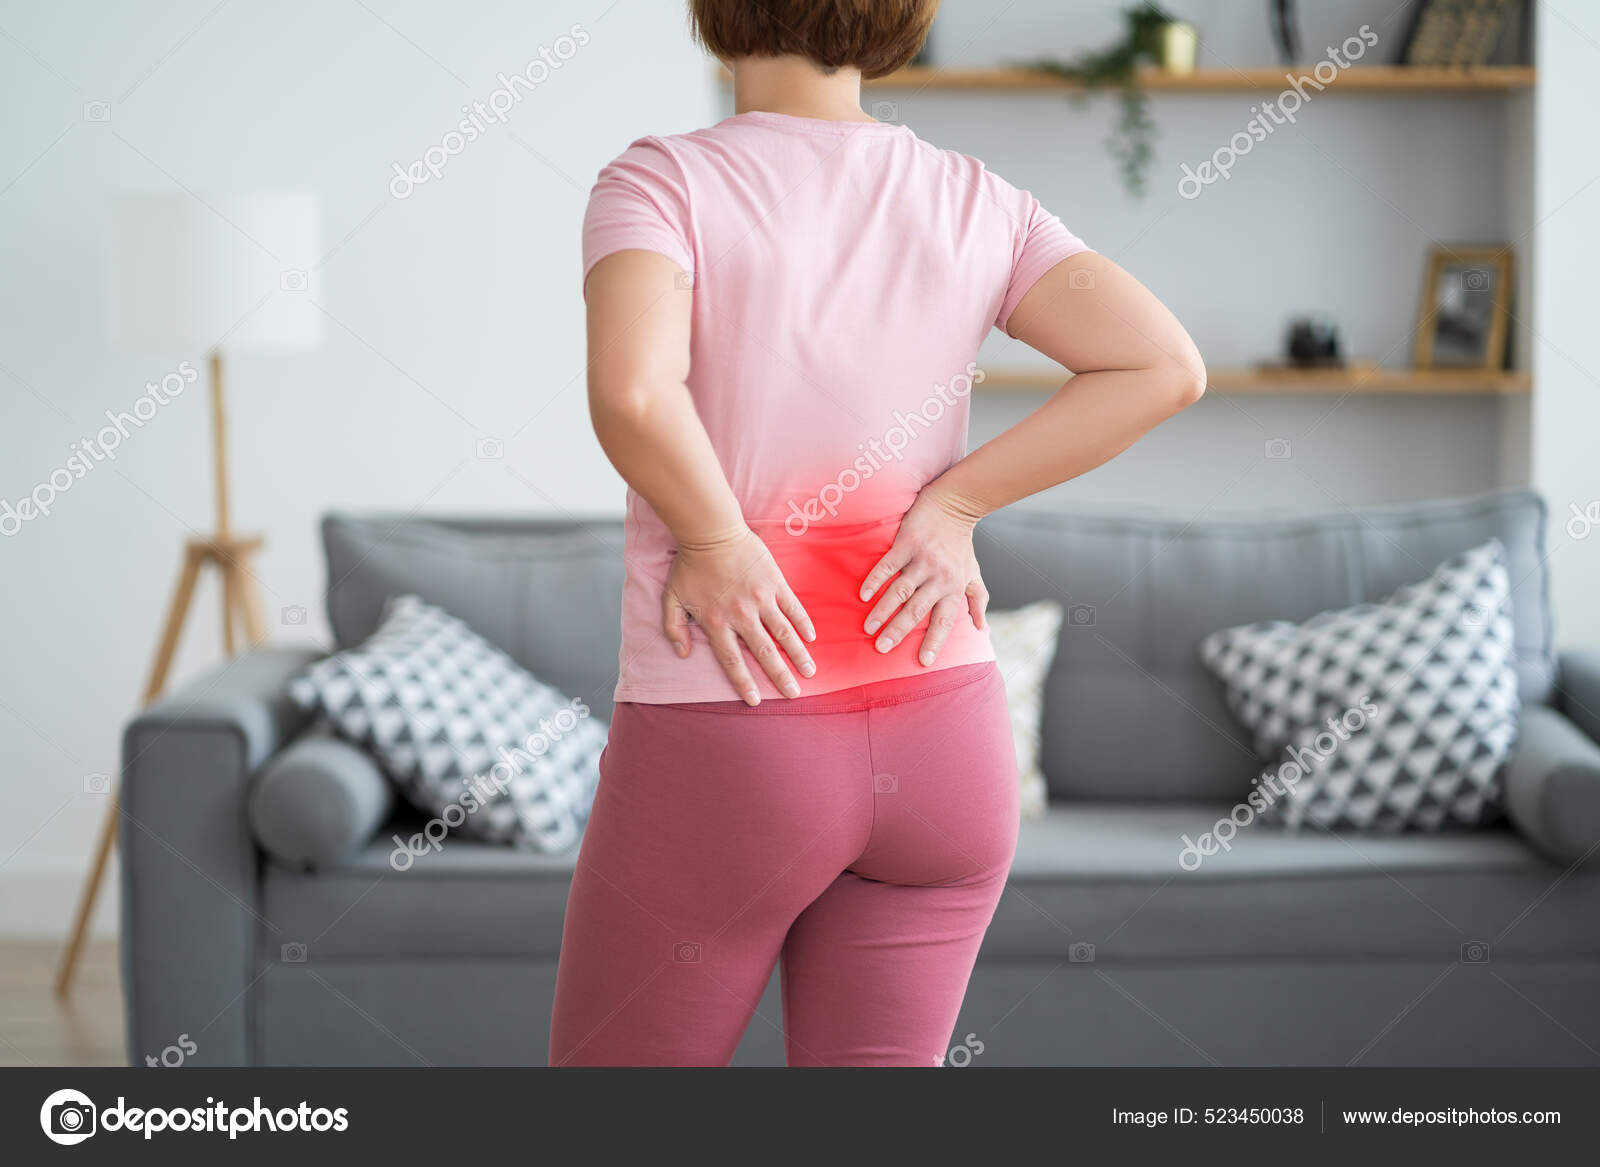 Back Pain Kidney Inflammation Woman Suffering Backache Home Painful